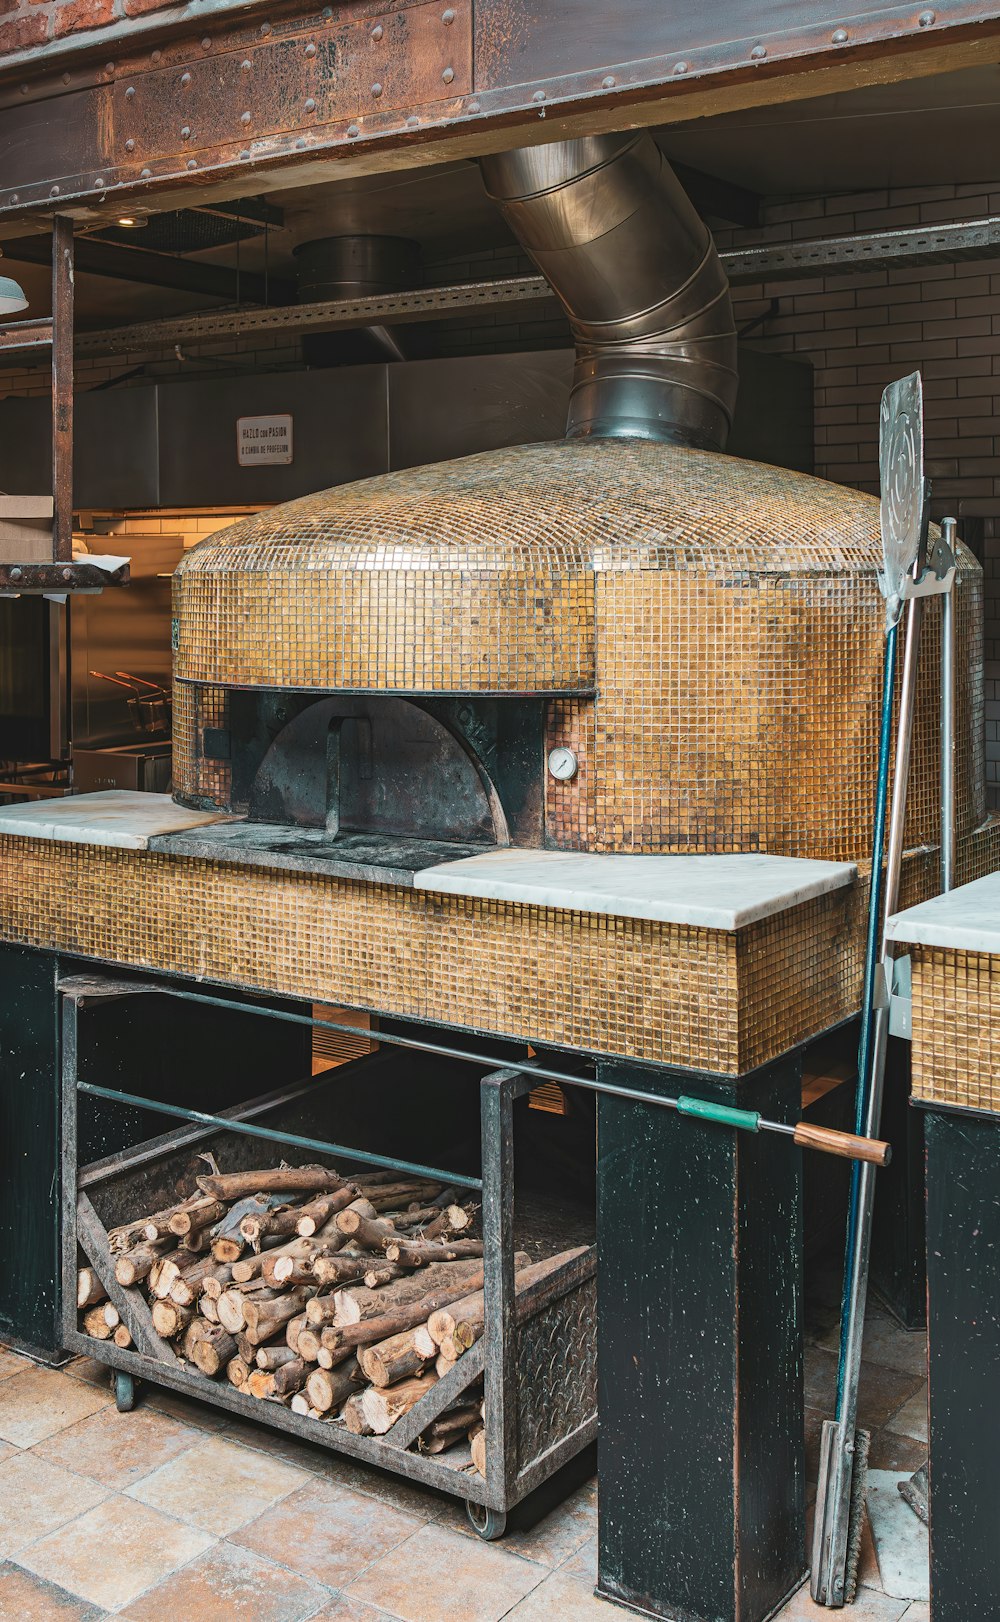 a large brick oven sitting inside of a kitchen